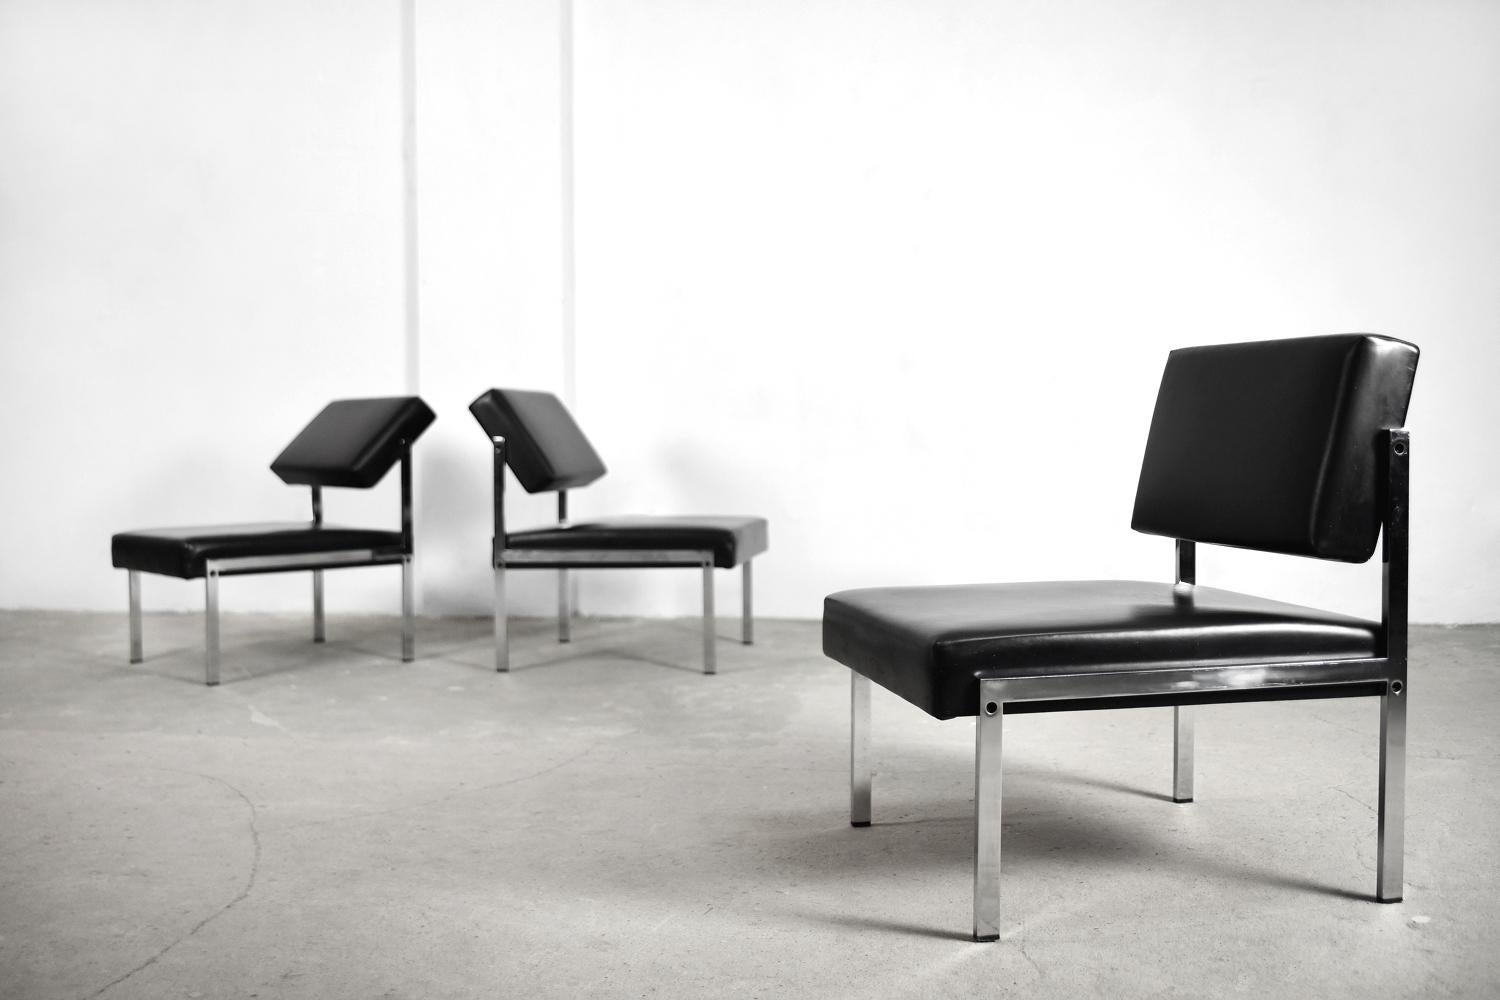 Minimalist German Chrome and Leather Modular Lounge Chairs from Brune, 1960s For Sale 3